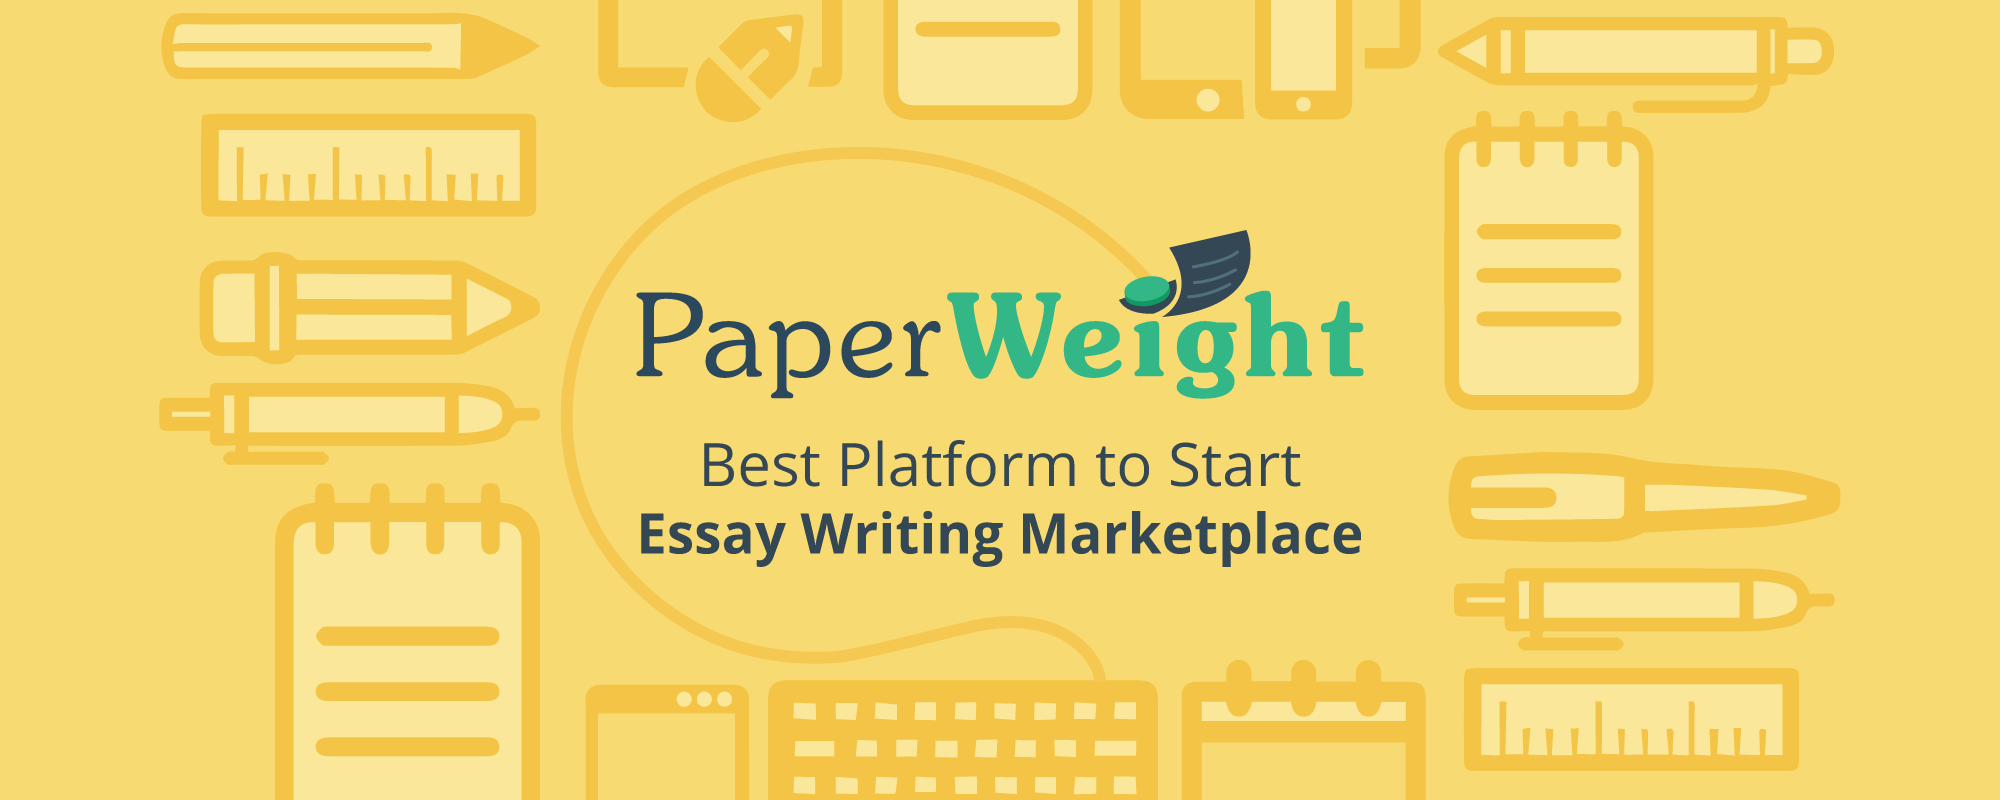 Paperweight – Easiest Way to Start Essay Writing Platforms